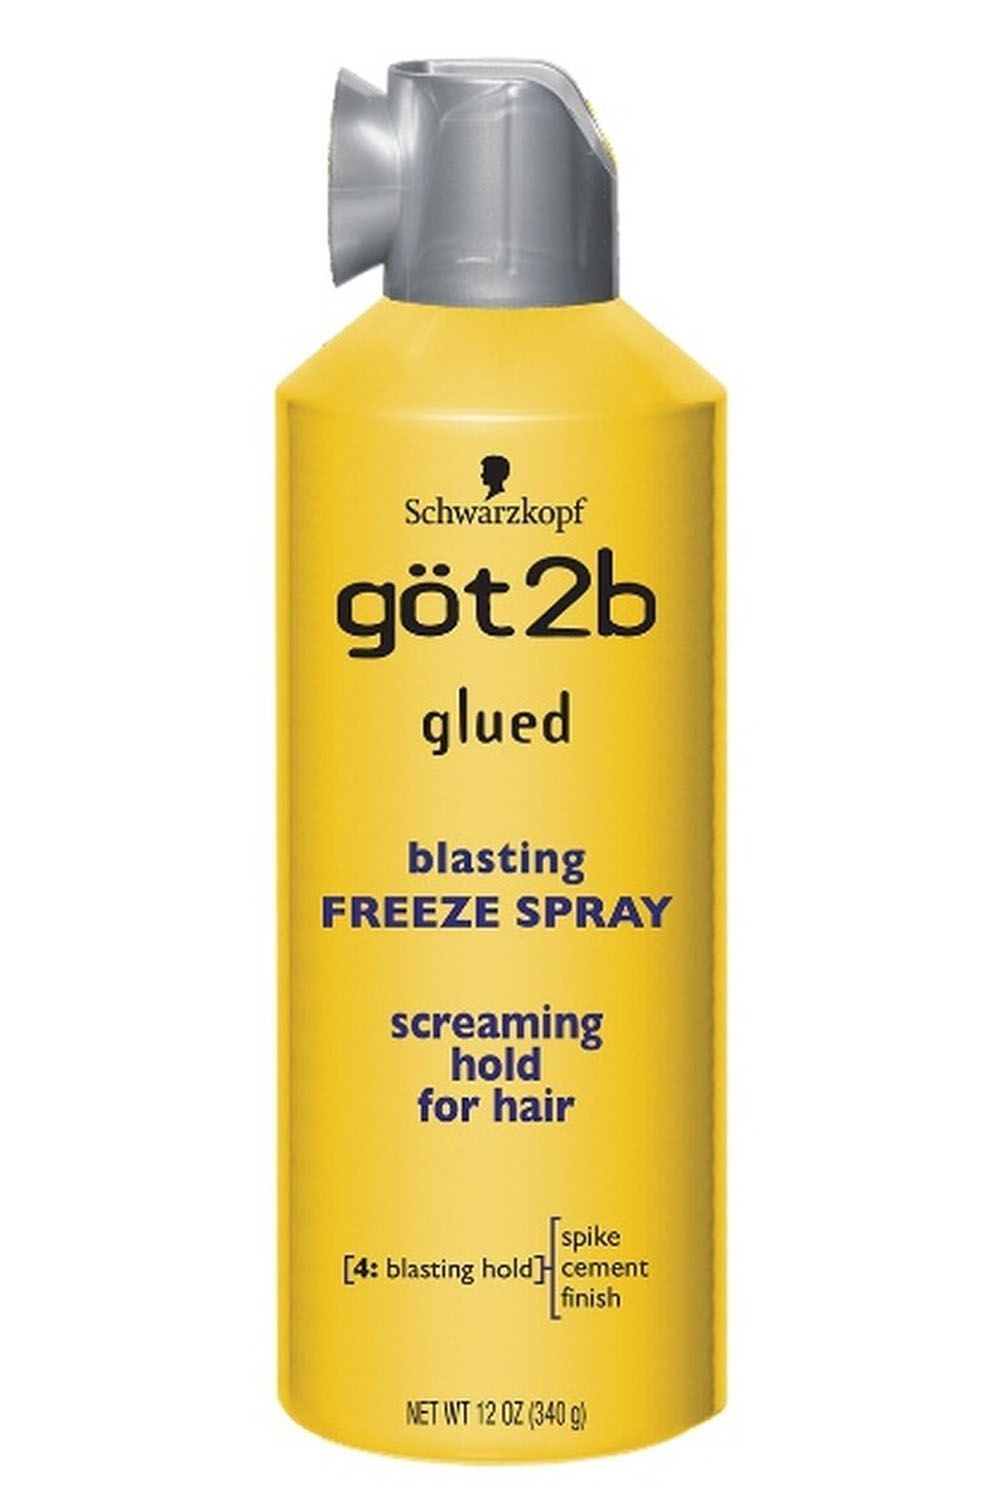 7 Best Wig Glues of 2022 for Strong and Gentle Hold